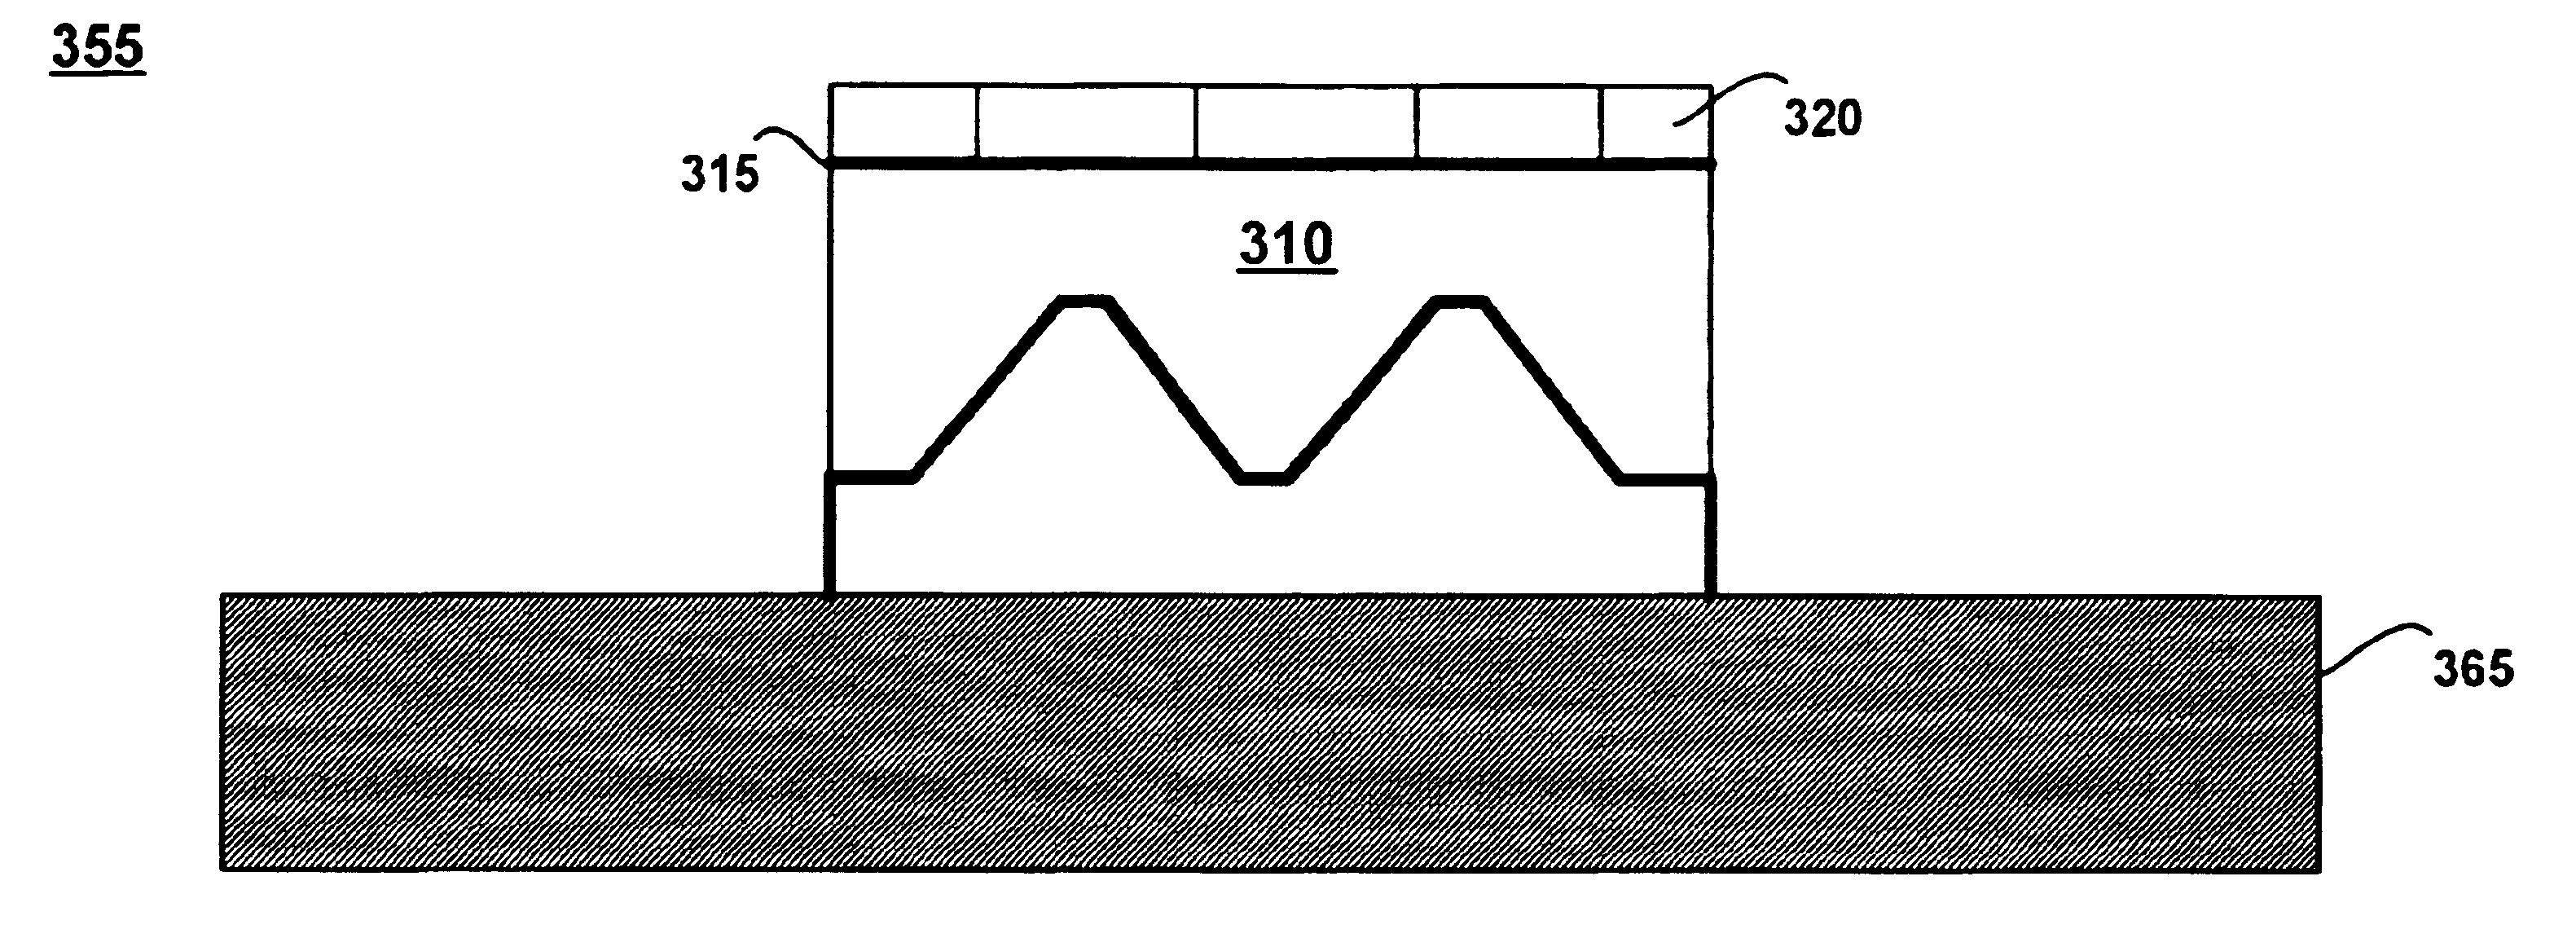 Semiconductor substrate with trenches for reducing substrate resistance